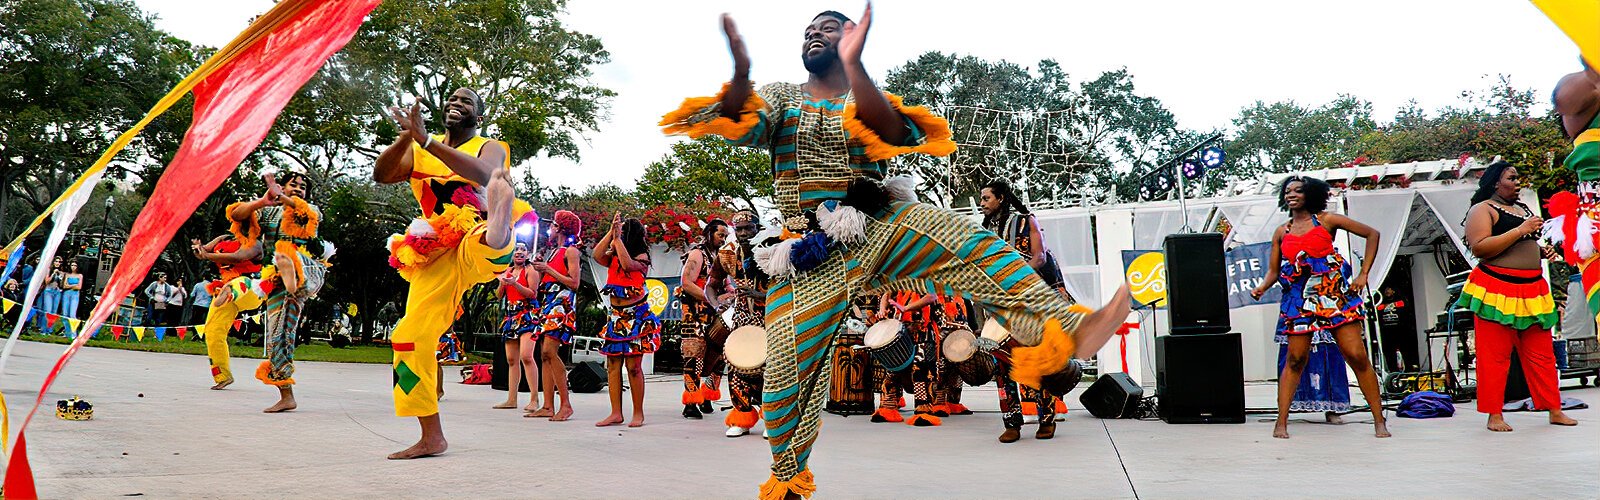 The Dundu Dole Urban African Ballet is a First Night St. Petersburg favorite and their high energy and colorful costumes did not disappoint.